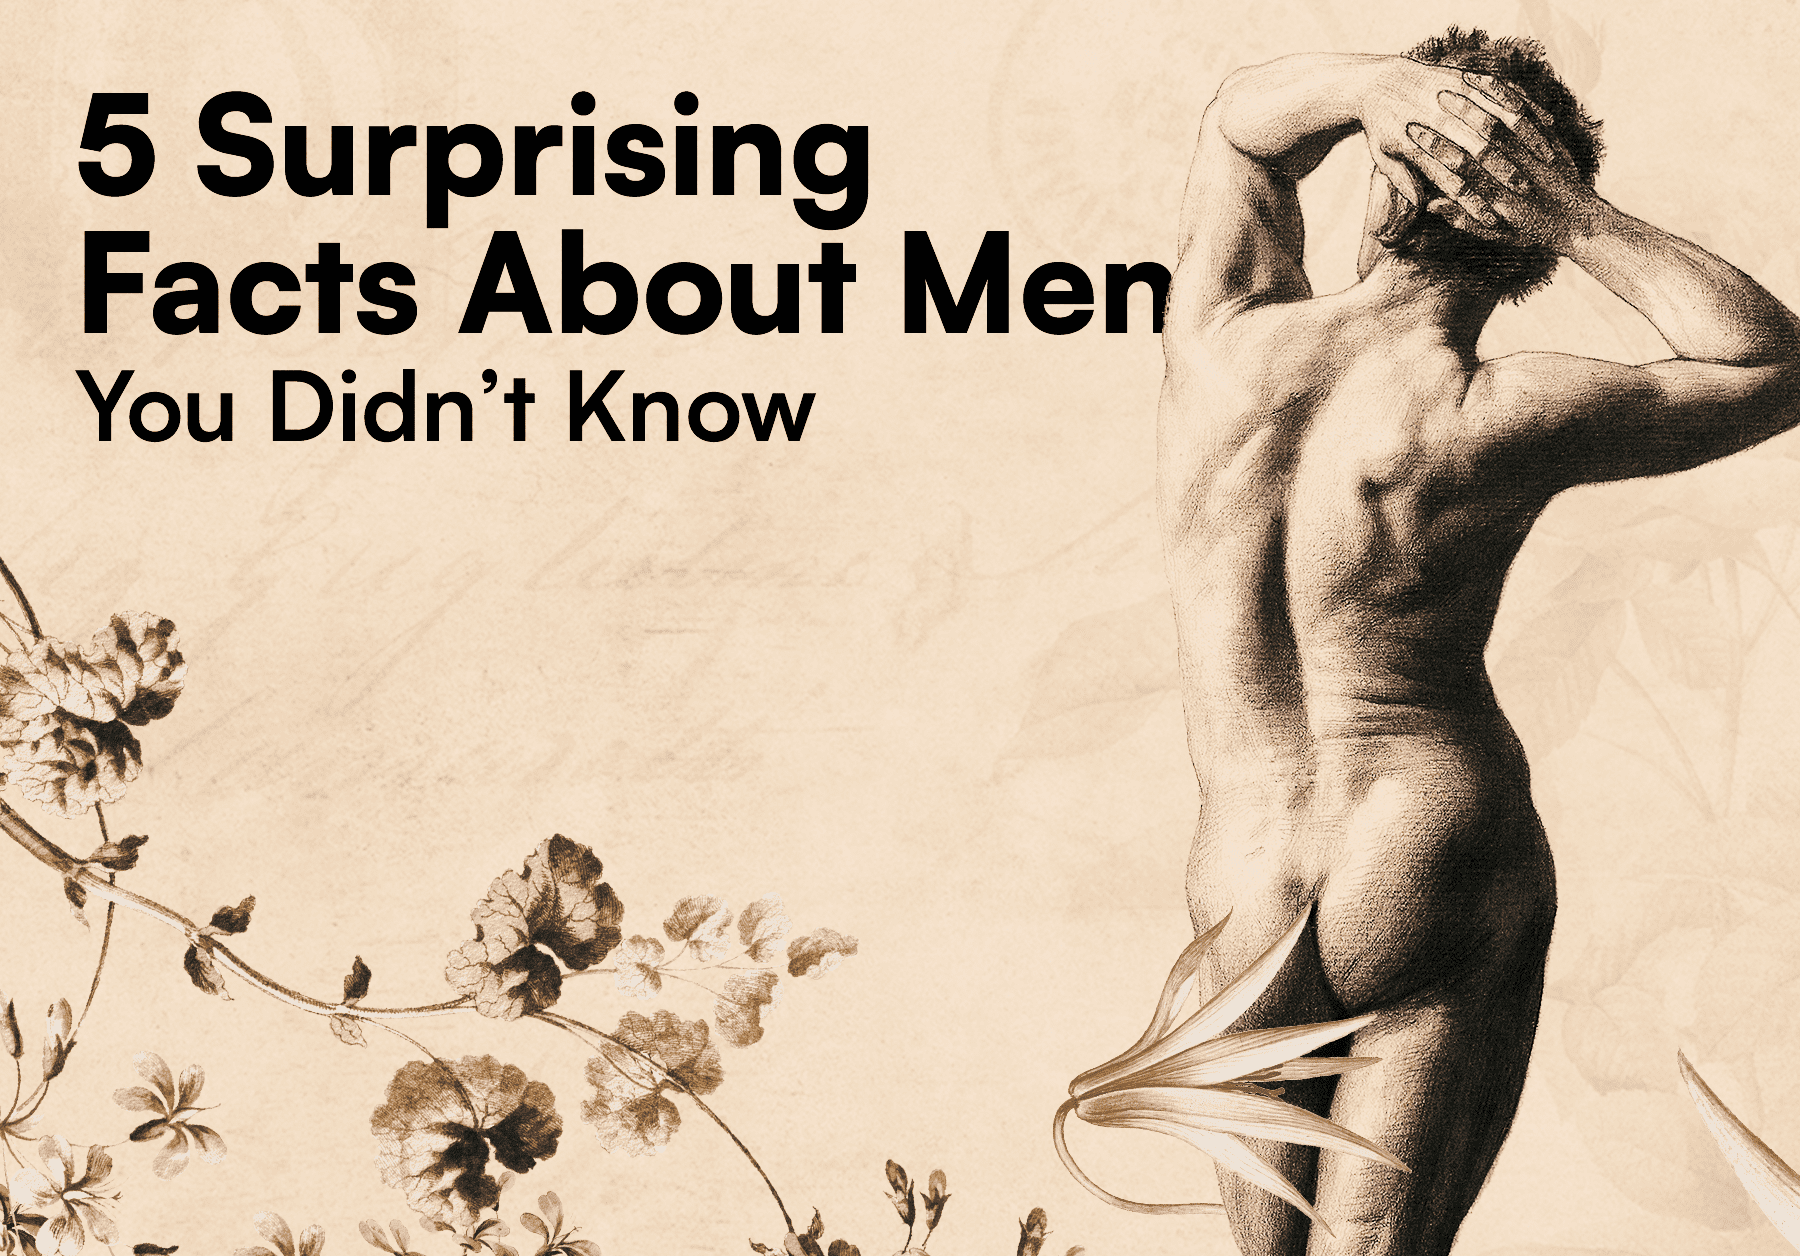 5 Surprising Facts About Men You Didn’t Know – From Lactation to the Male G-Spot